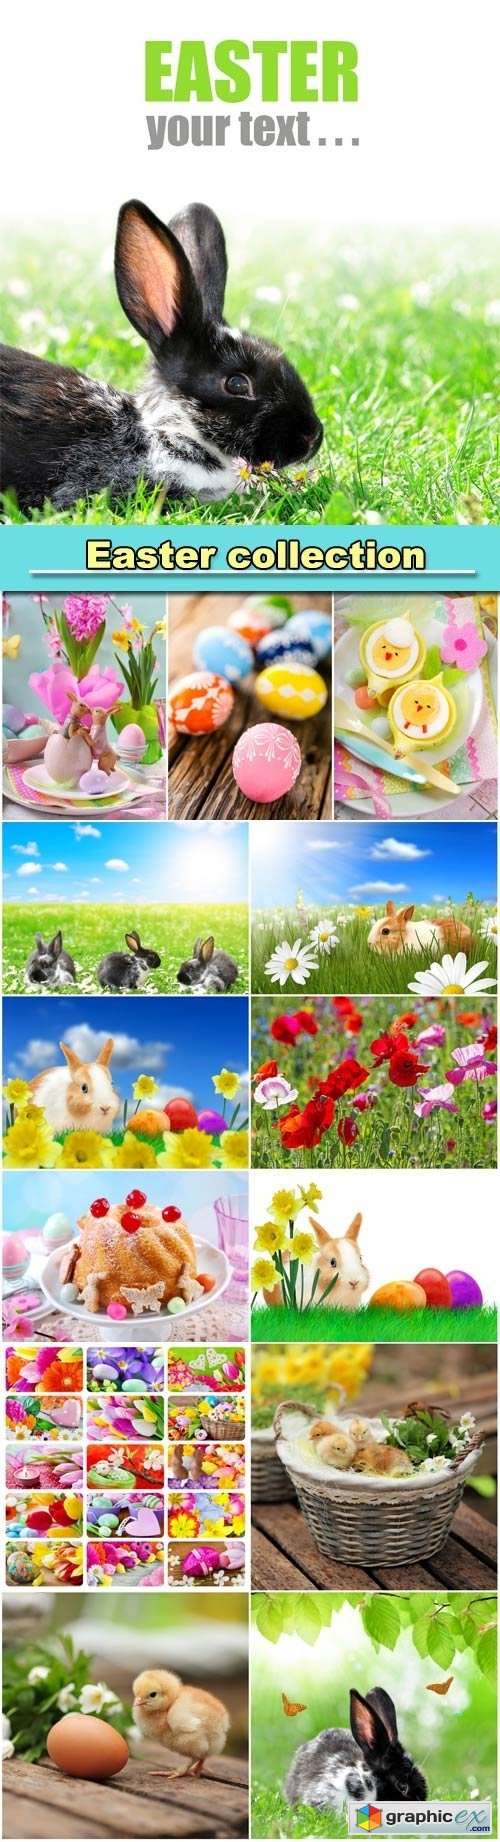 Easter collection, rabbits and chickens, Easter eggs